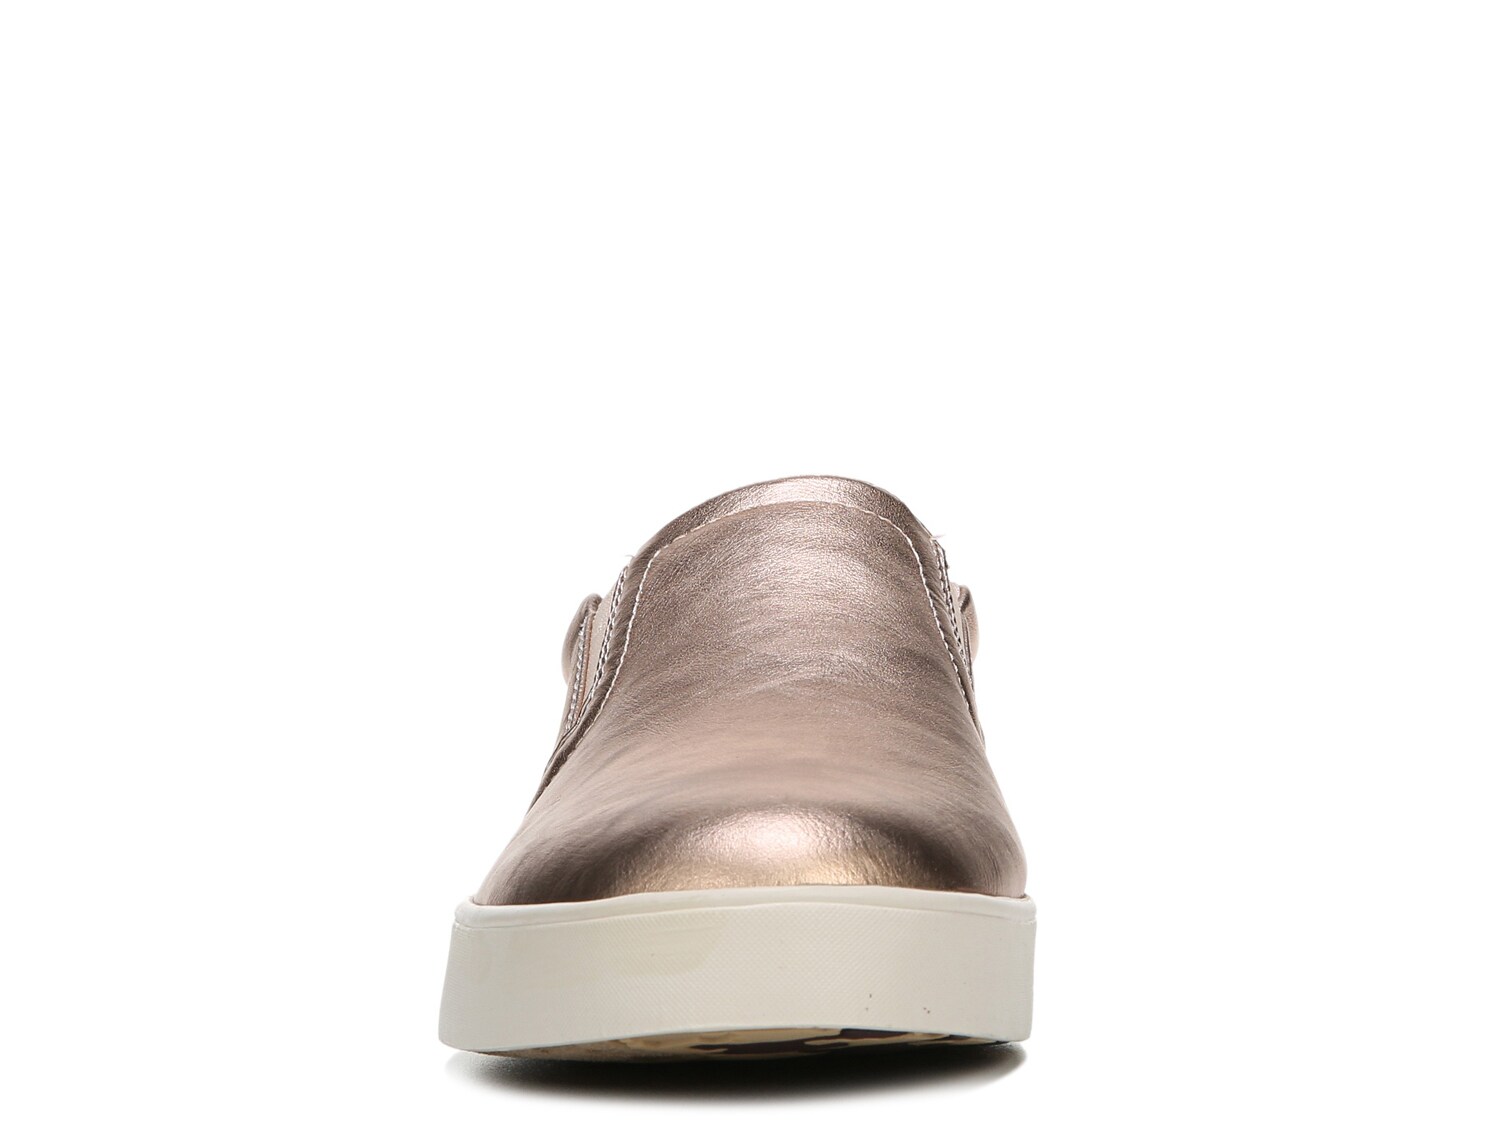 dr scholl's madison rose gold